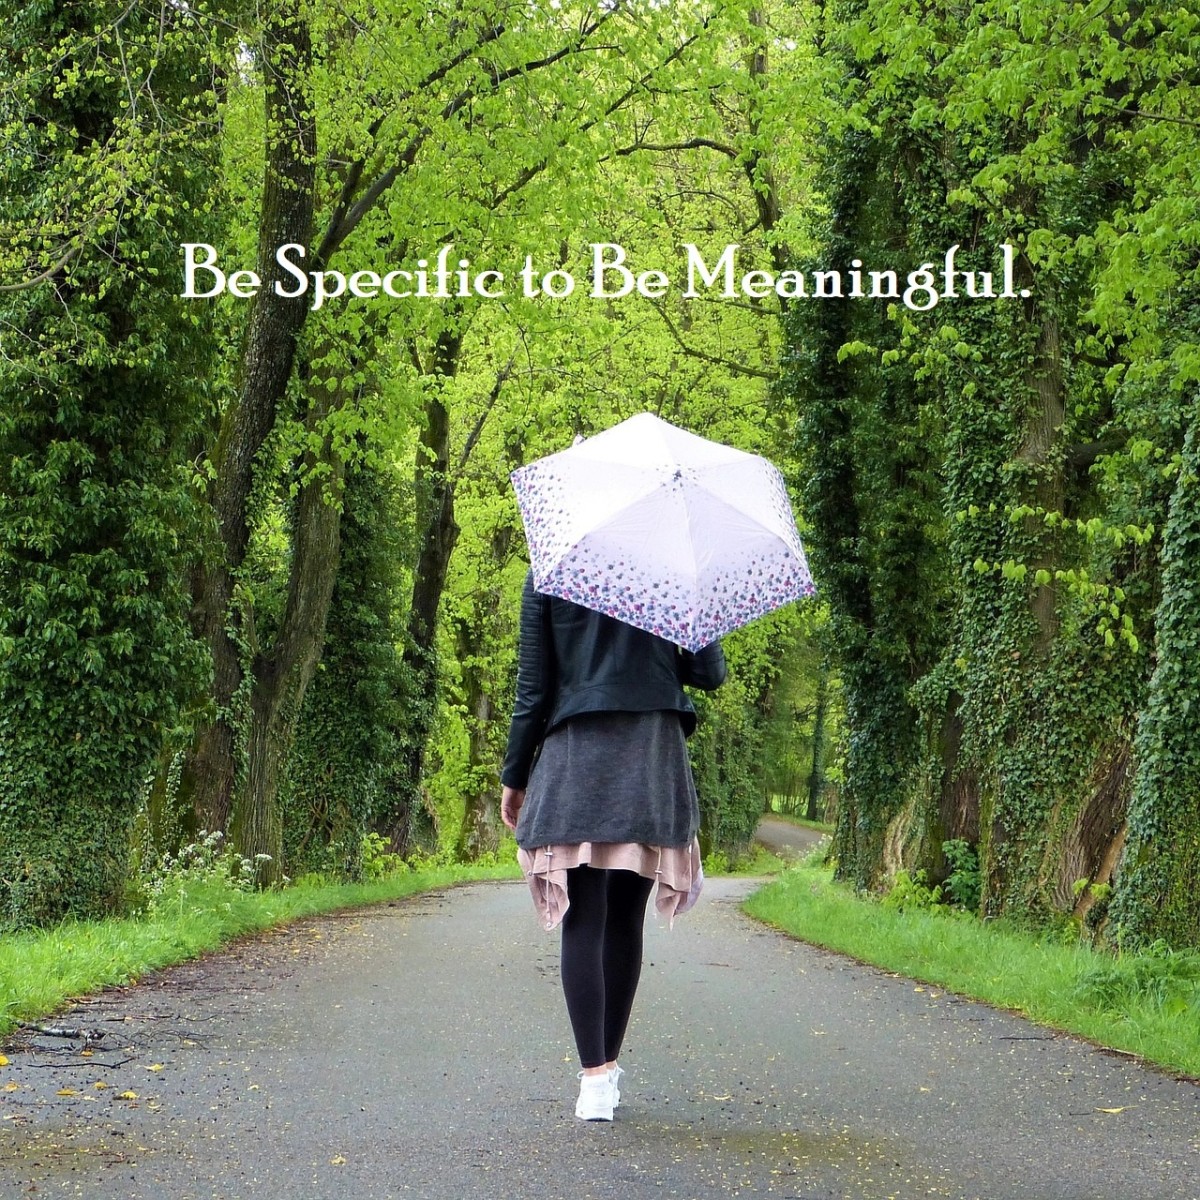 Always Be Specific to Be Meaningful